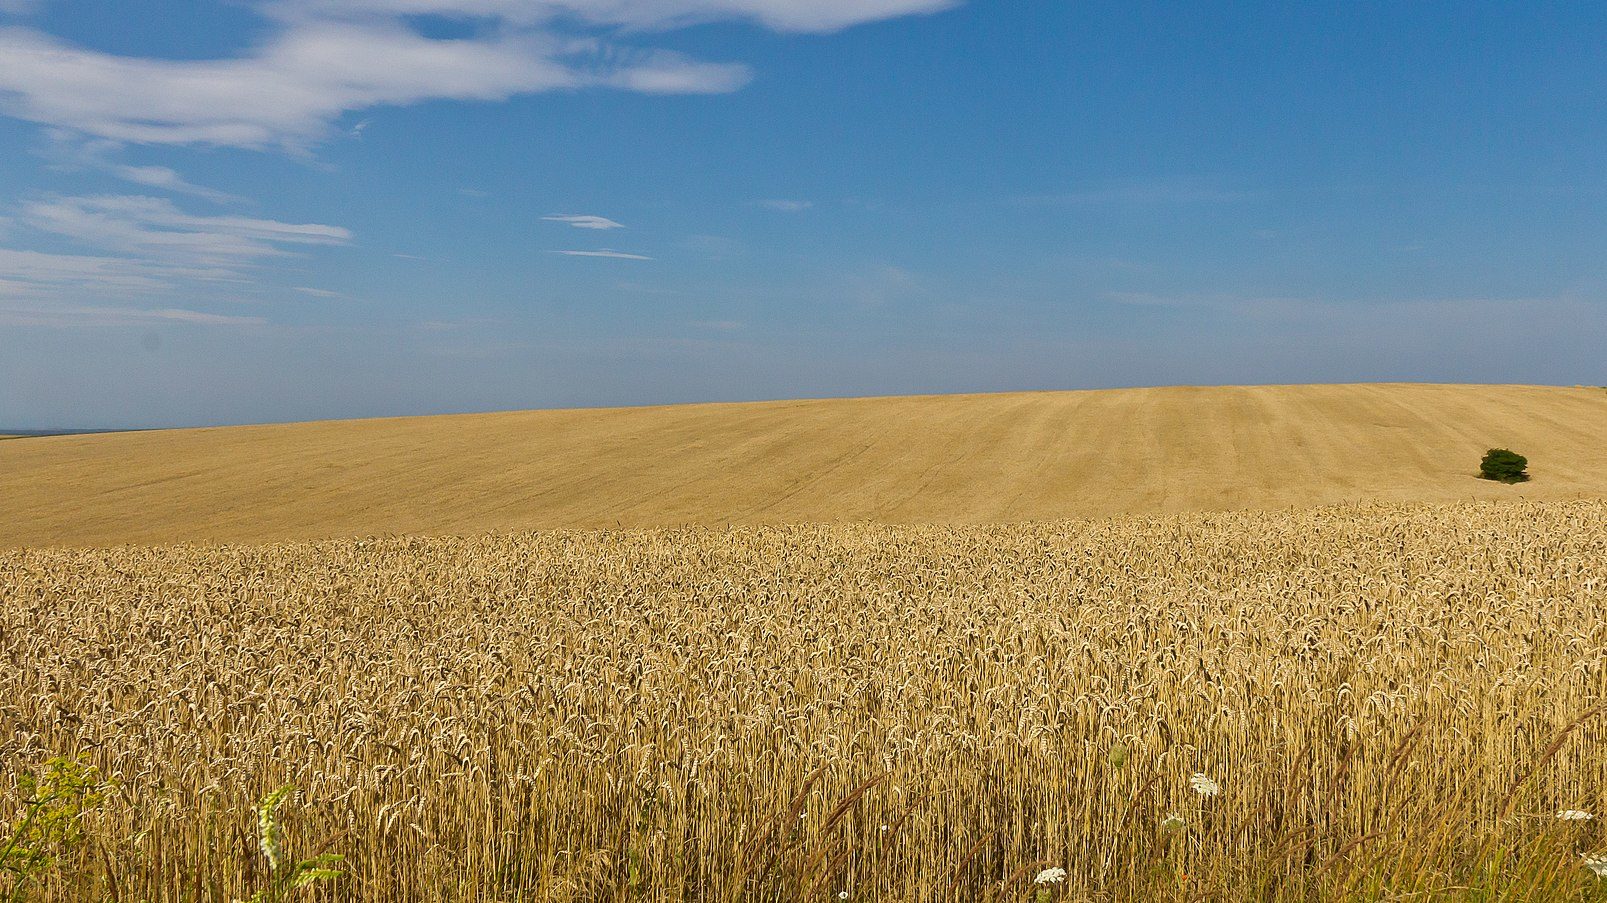 300,000 Metric Tons of Wheat Bought by Egypt Stuck in Ukraine